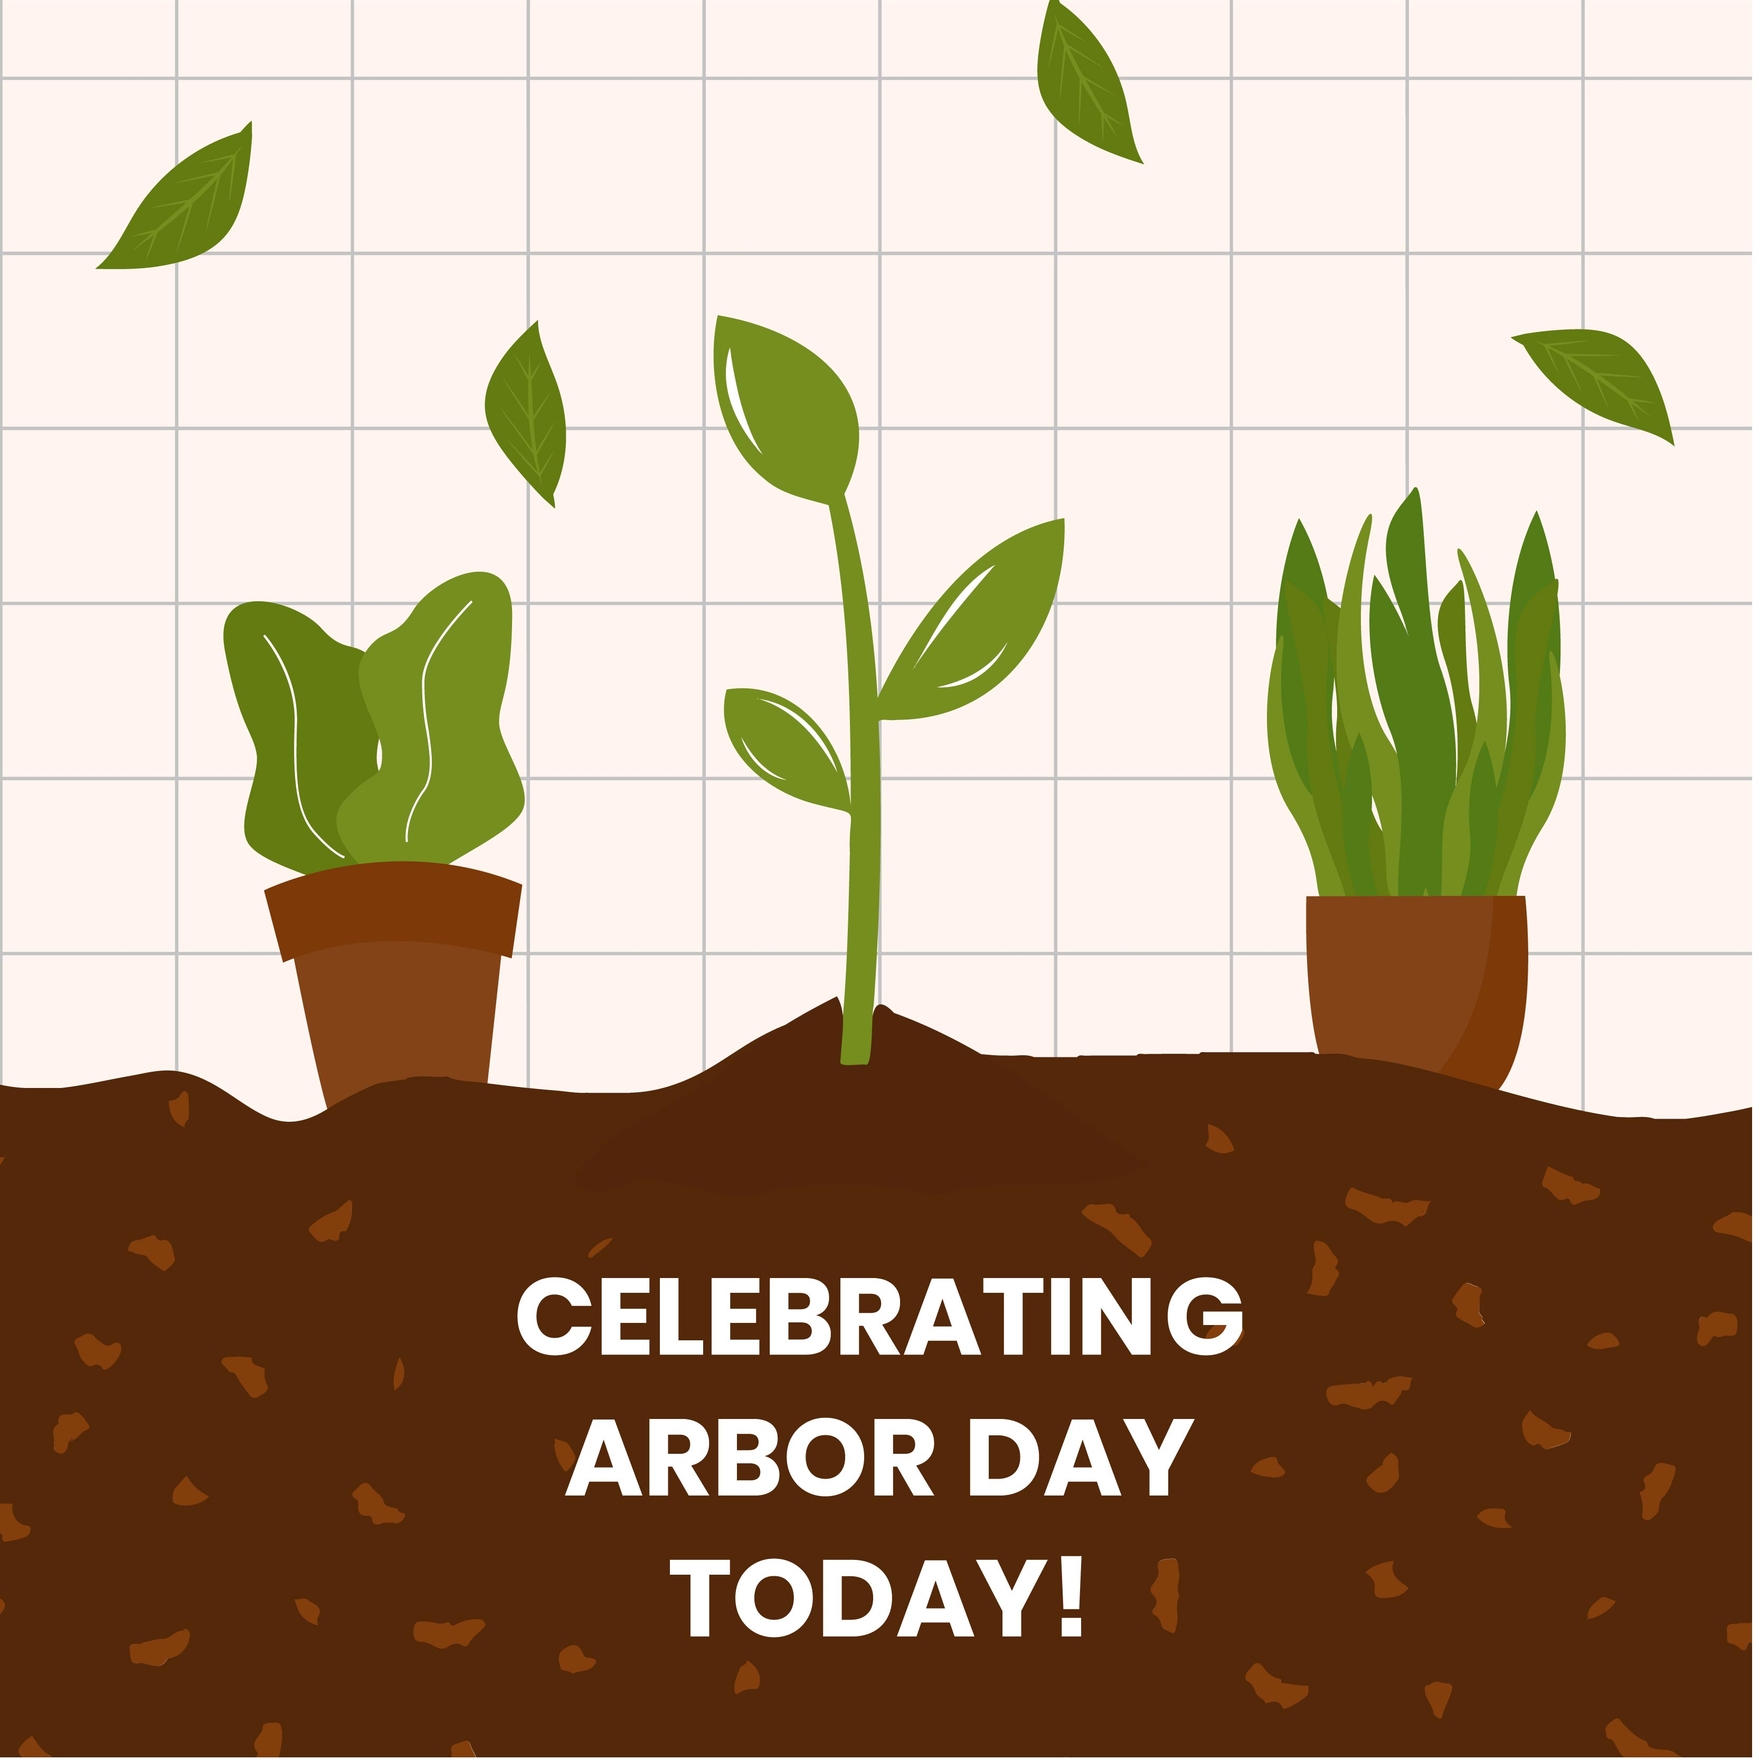 Free Arbor Day Whatsapp Post in Illustrator, PSD, EPS, SVG, PNG, JPEG